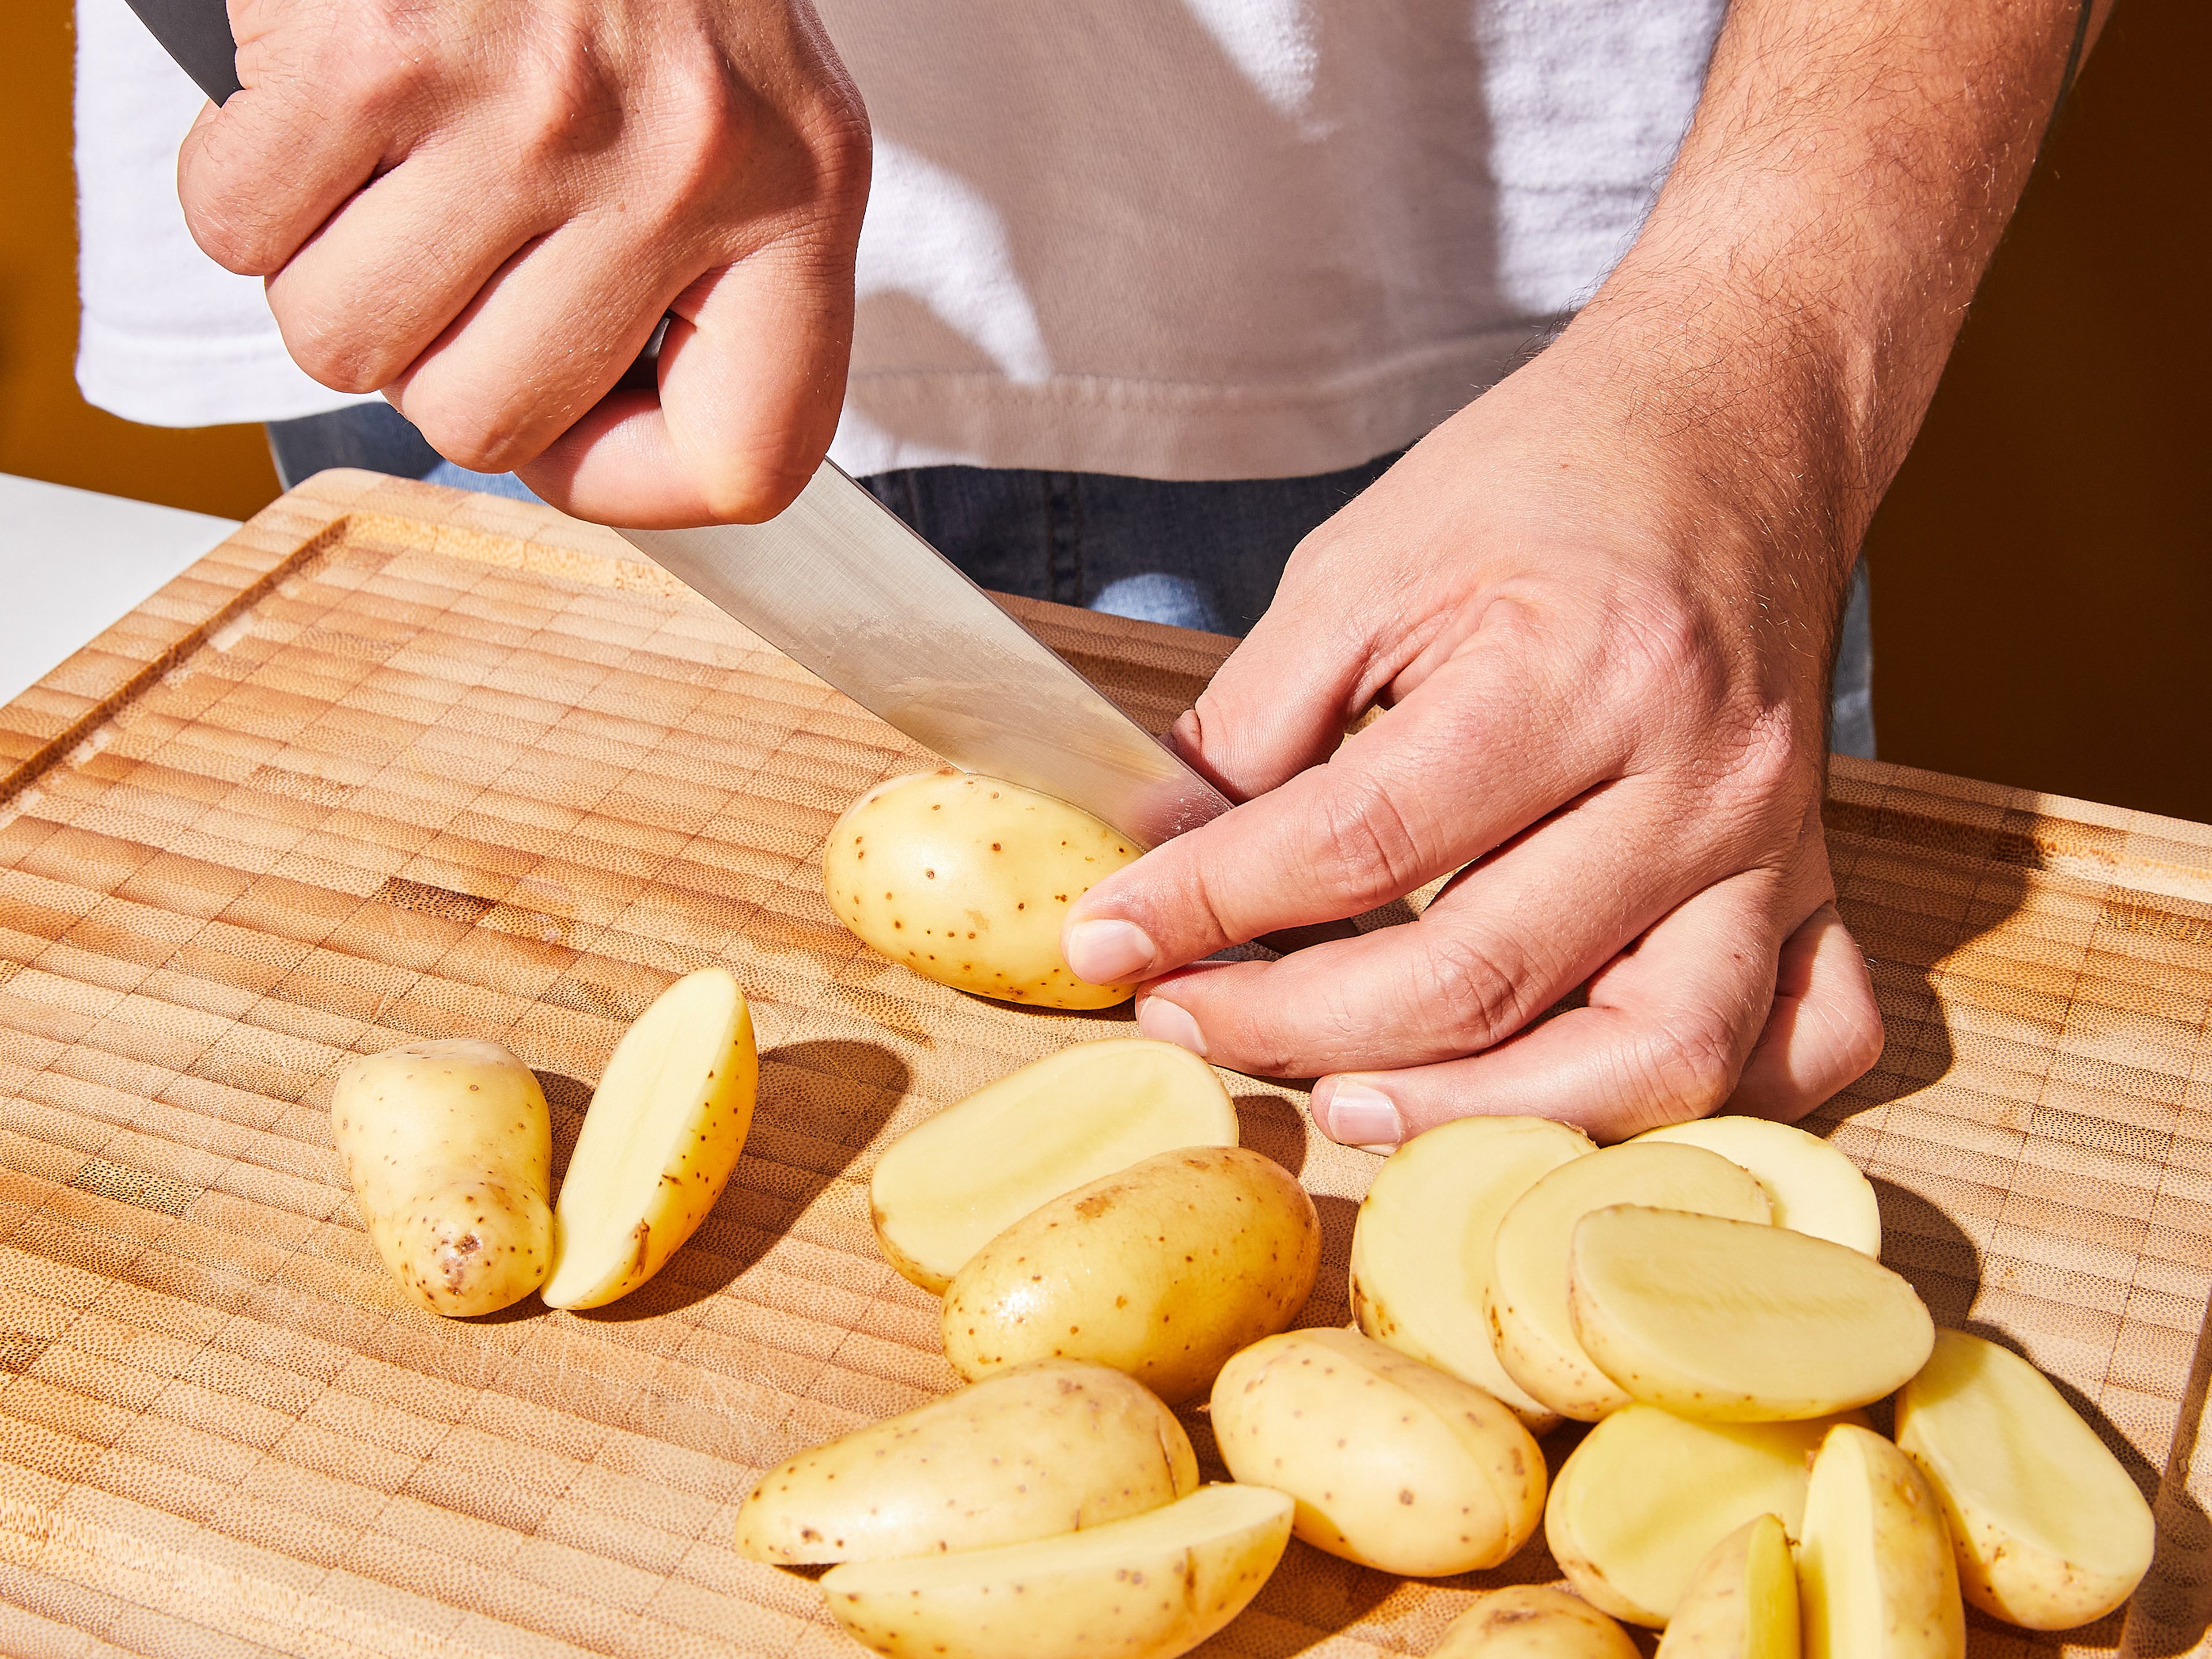 Halve potatoes or quarter them, if using bigger ones. Transfer potatoes to a large pot of salted room temperature water and bring to a boil. Once boiling, lower the heat and let simmer for approx. 10 min., or until tender. Once they are done, drain potatoes and leave in the pan to finish steaming.